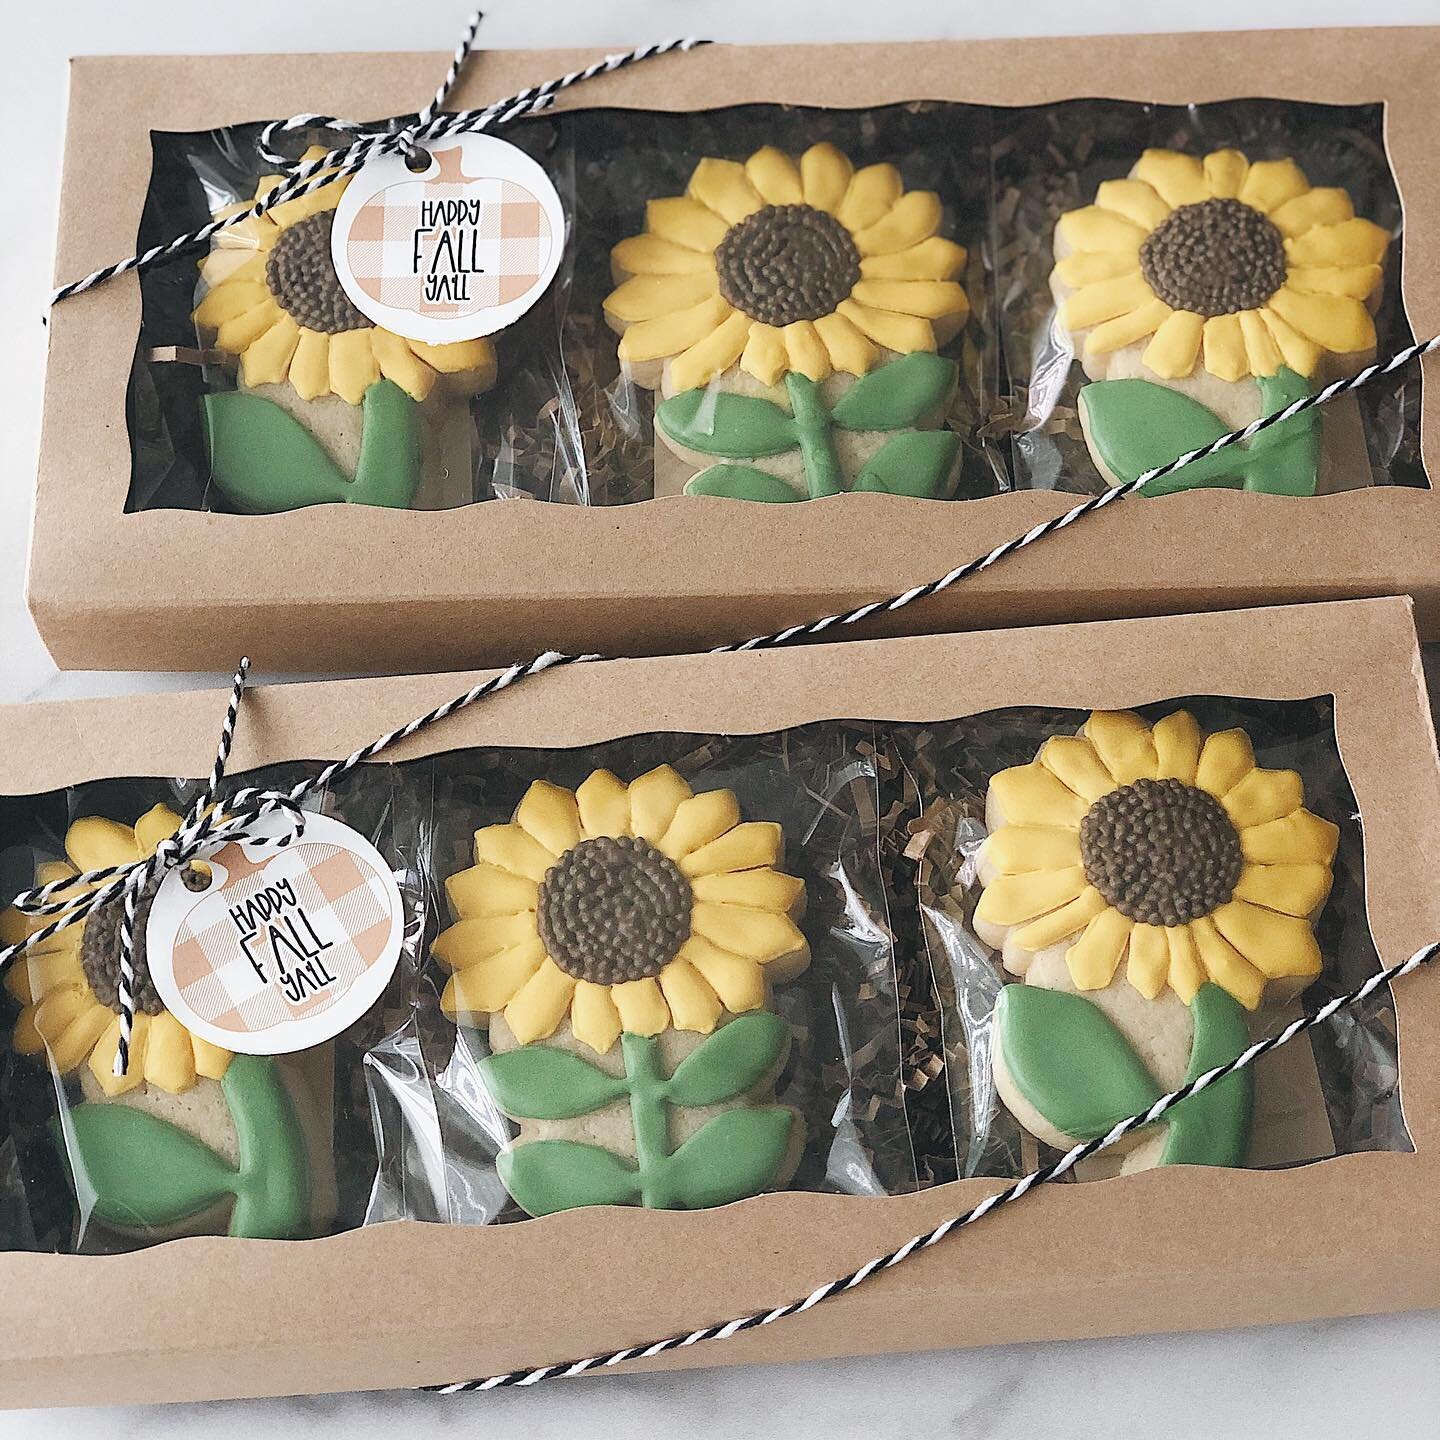 Cheery little sunflower sets... soon it will be all things Fall like pumpkins cozy sweaters, Halloween, etc. but until then it&rsquo;s more🌻🌻🌻🌻🌻!